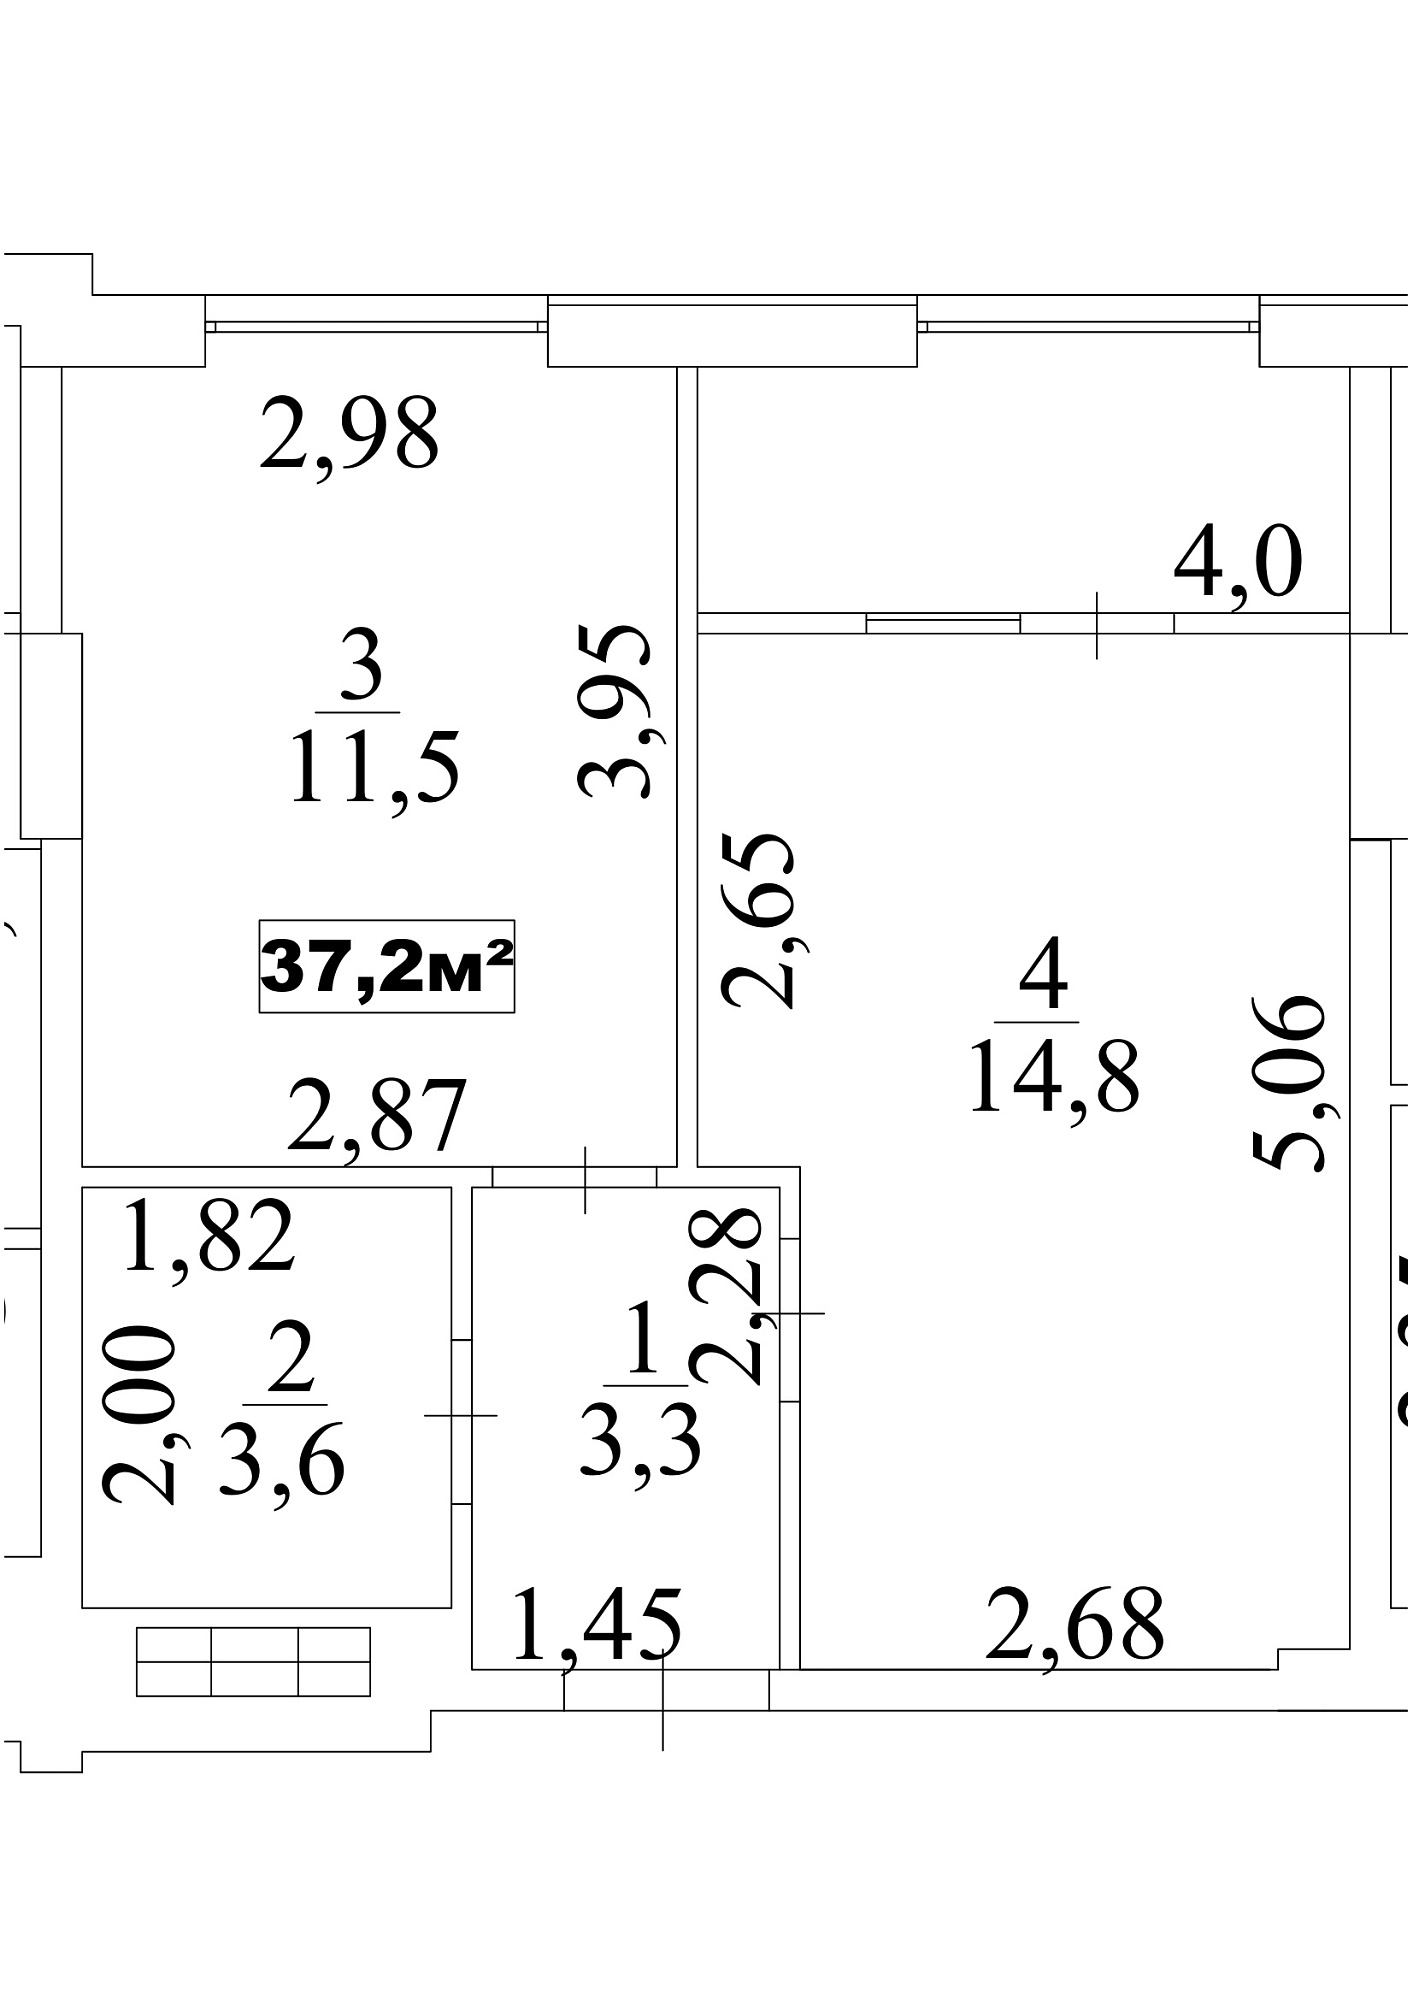 Planning 1-rm flats area 37.2m2, AB-10-08/00069.